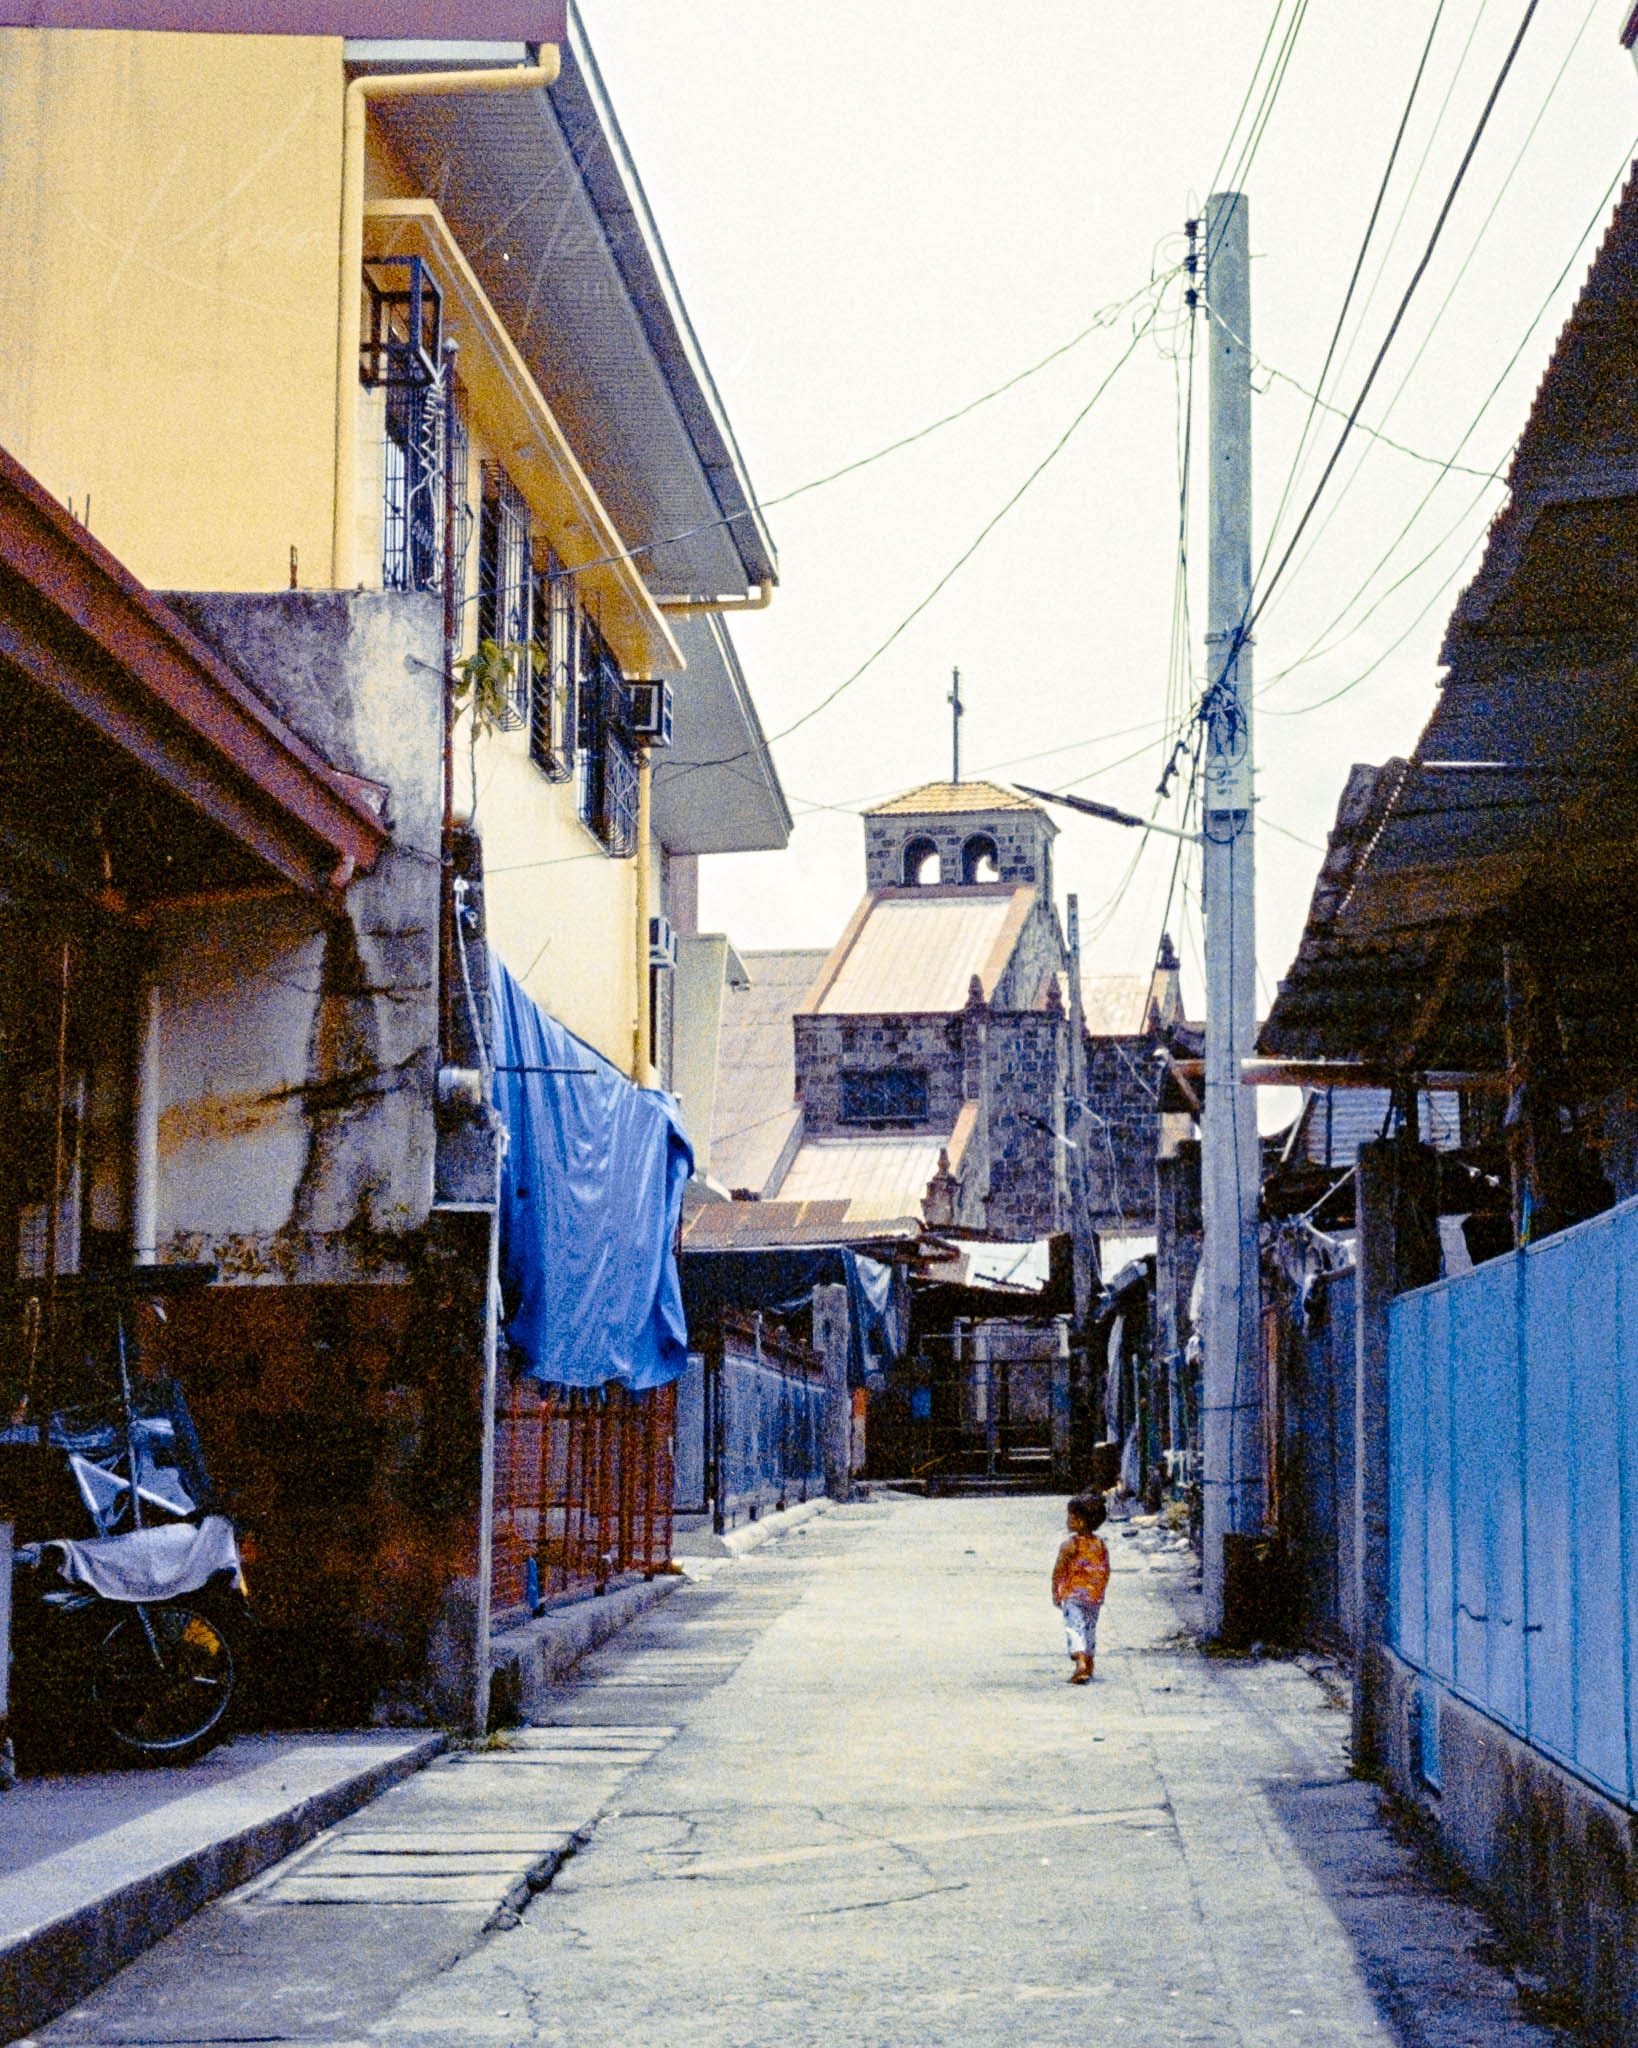 Child walking on vibrant, tropical street with colorful residential buildings and urban utilities.